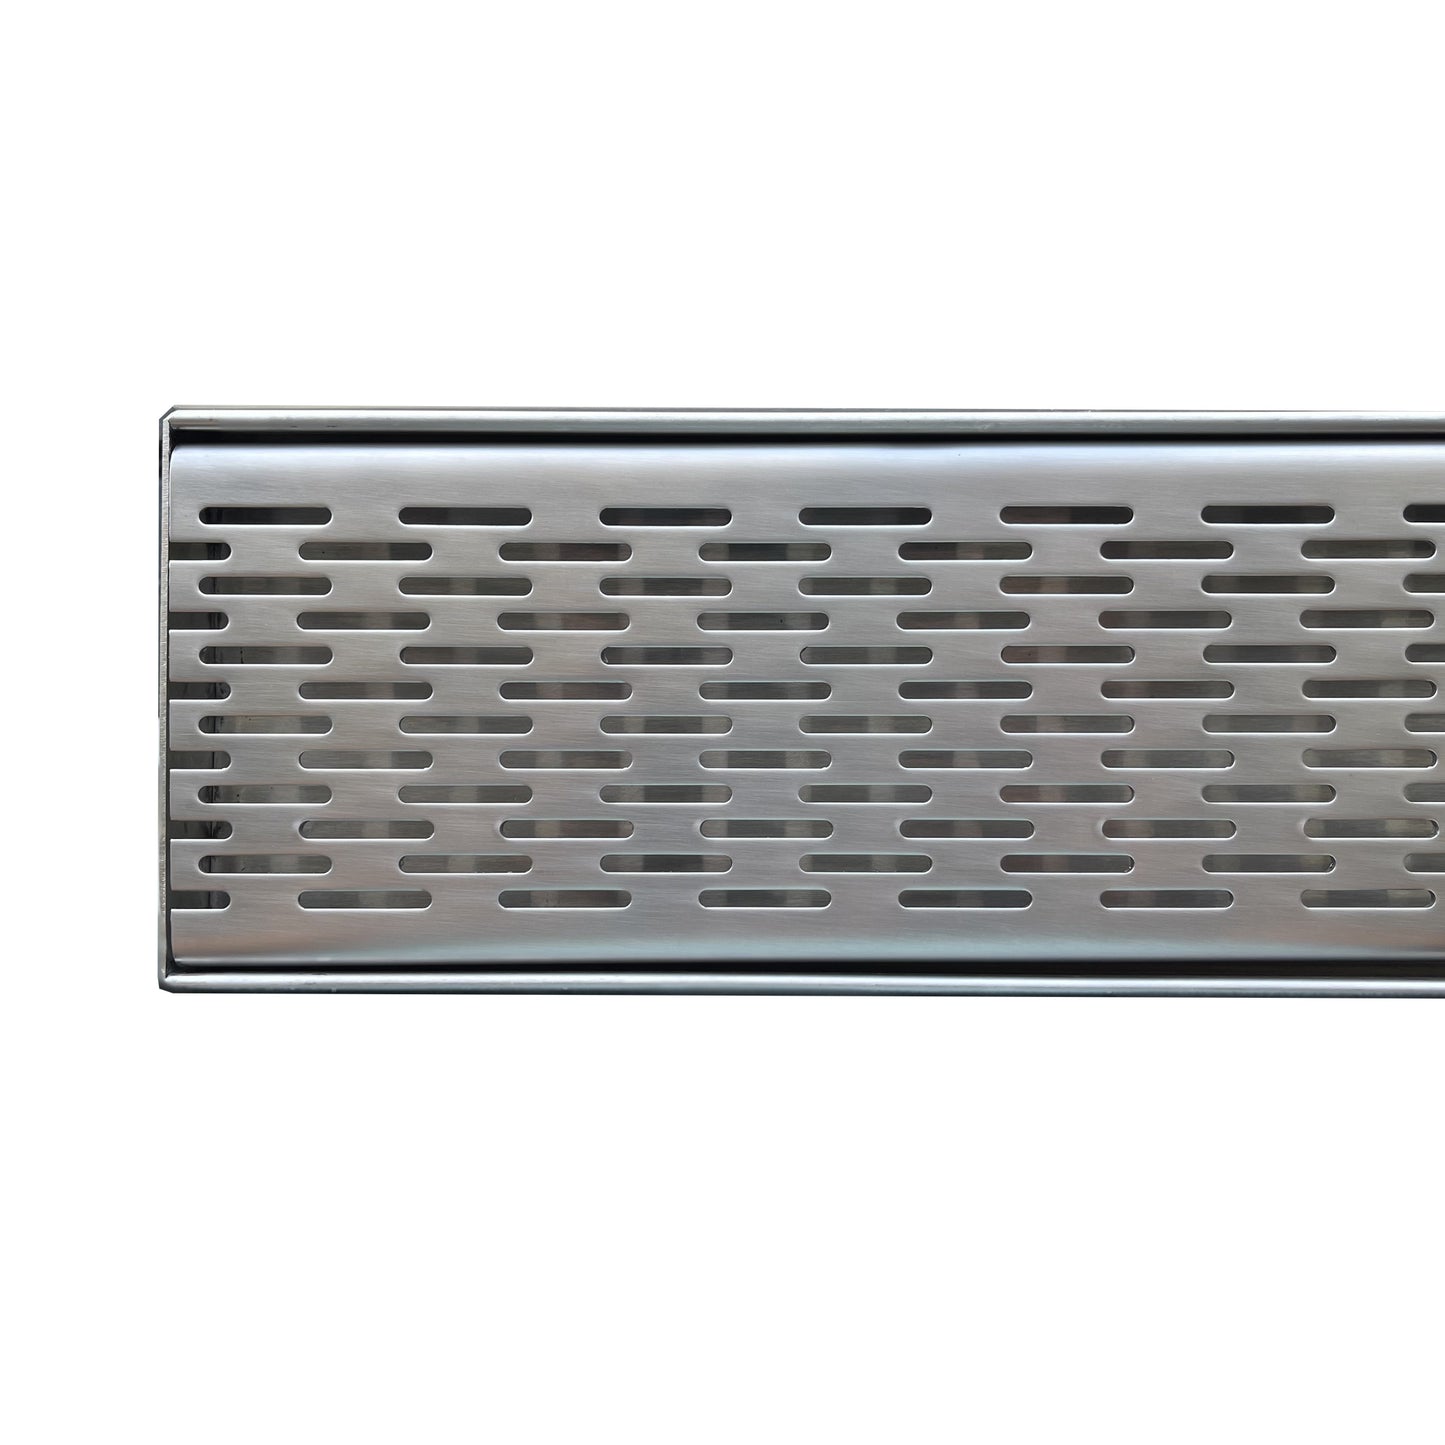 Brick Pattern Grate and Channel Drain - Stainless Steel